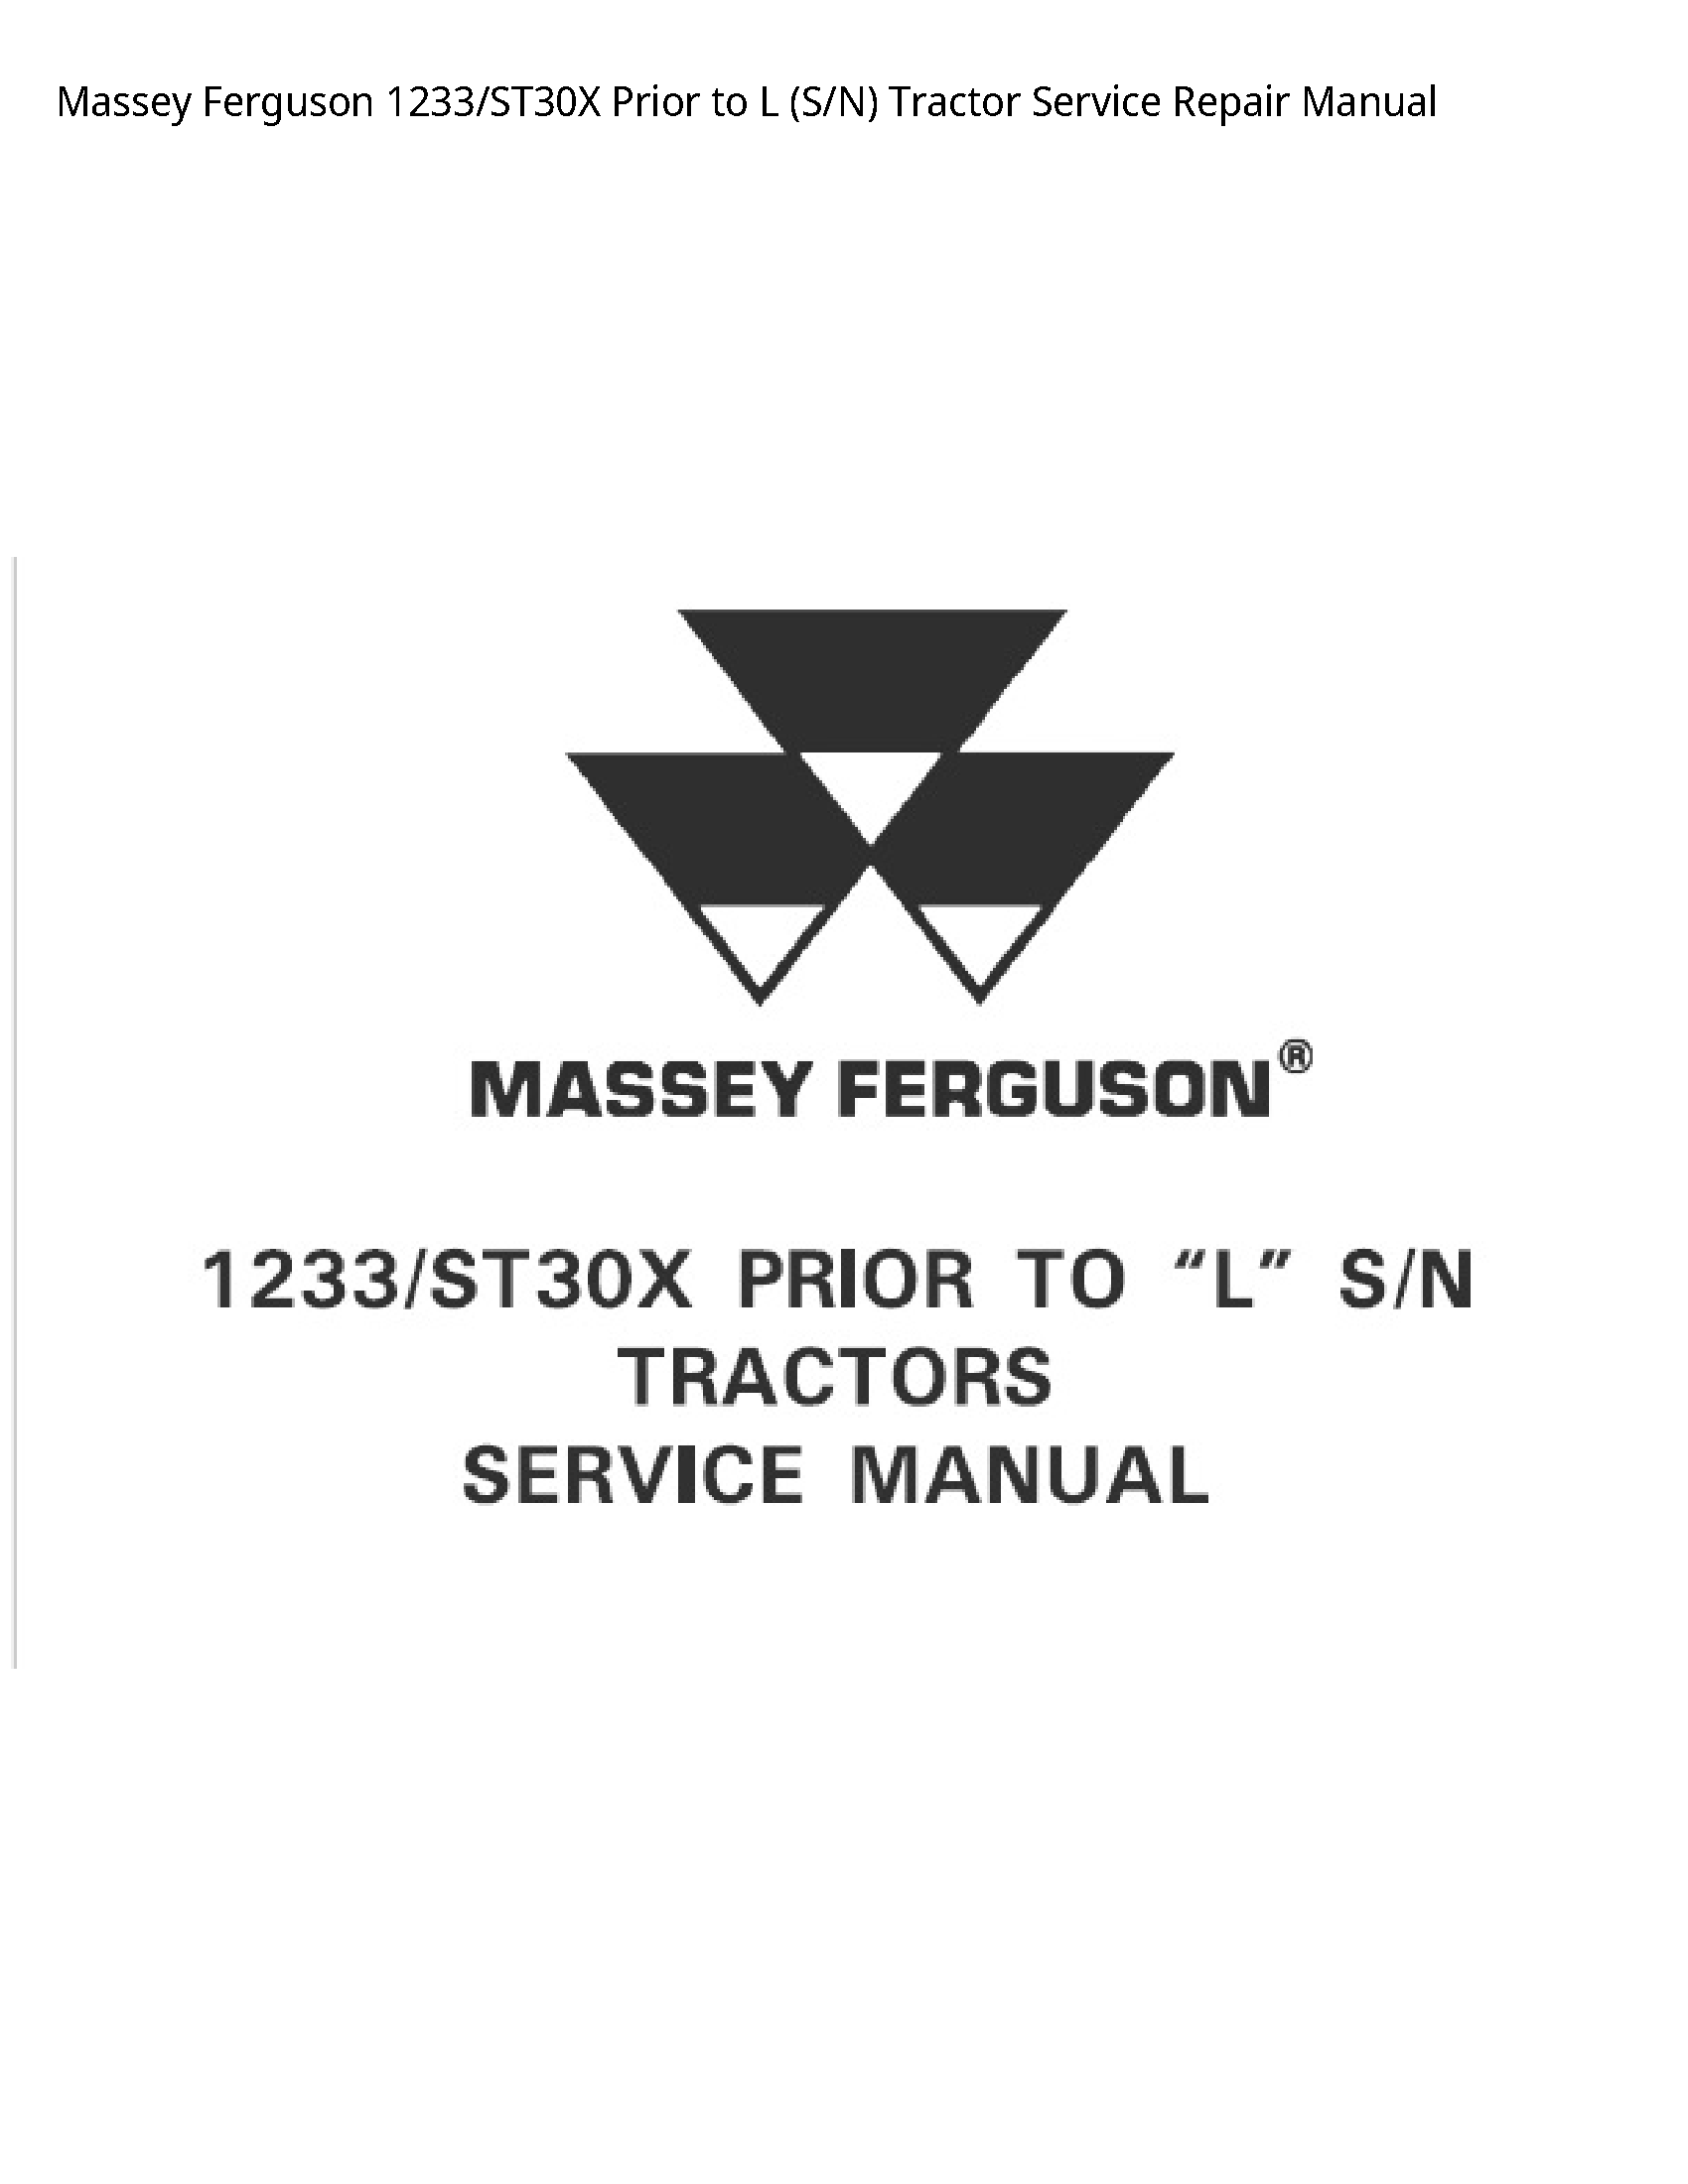 Massey Ferguson 1233 Prior to (S/N) Tractor manual